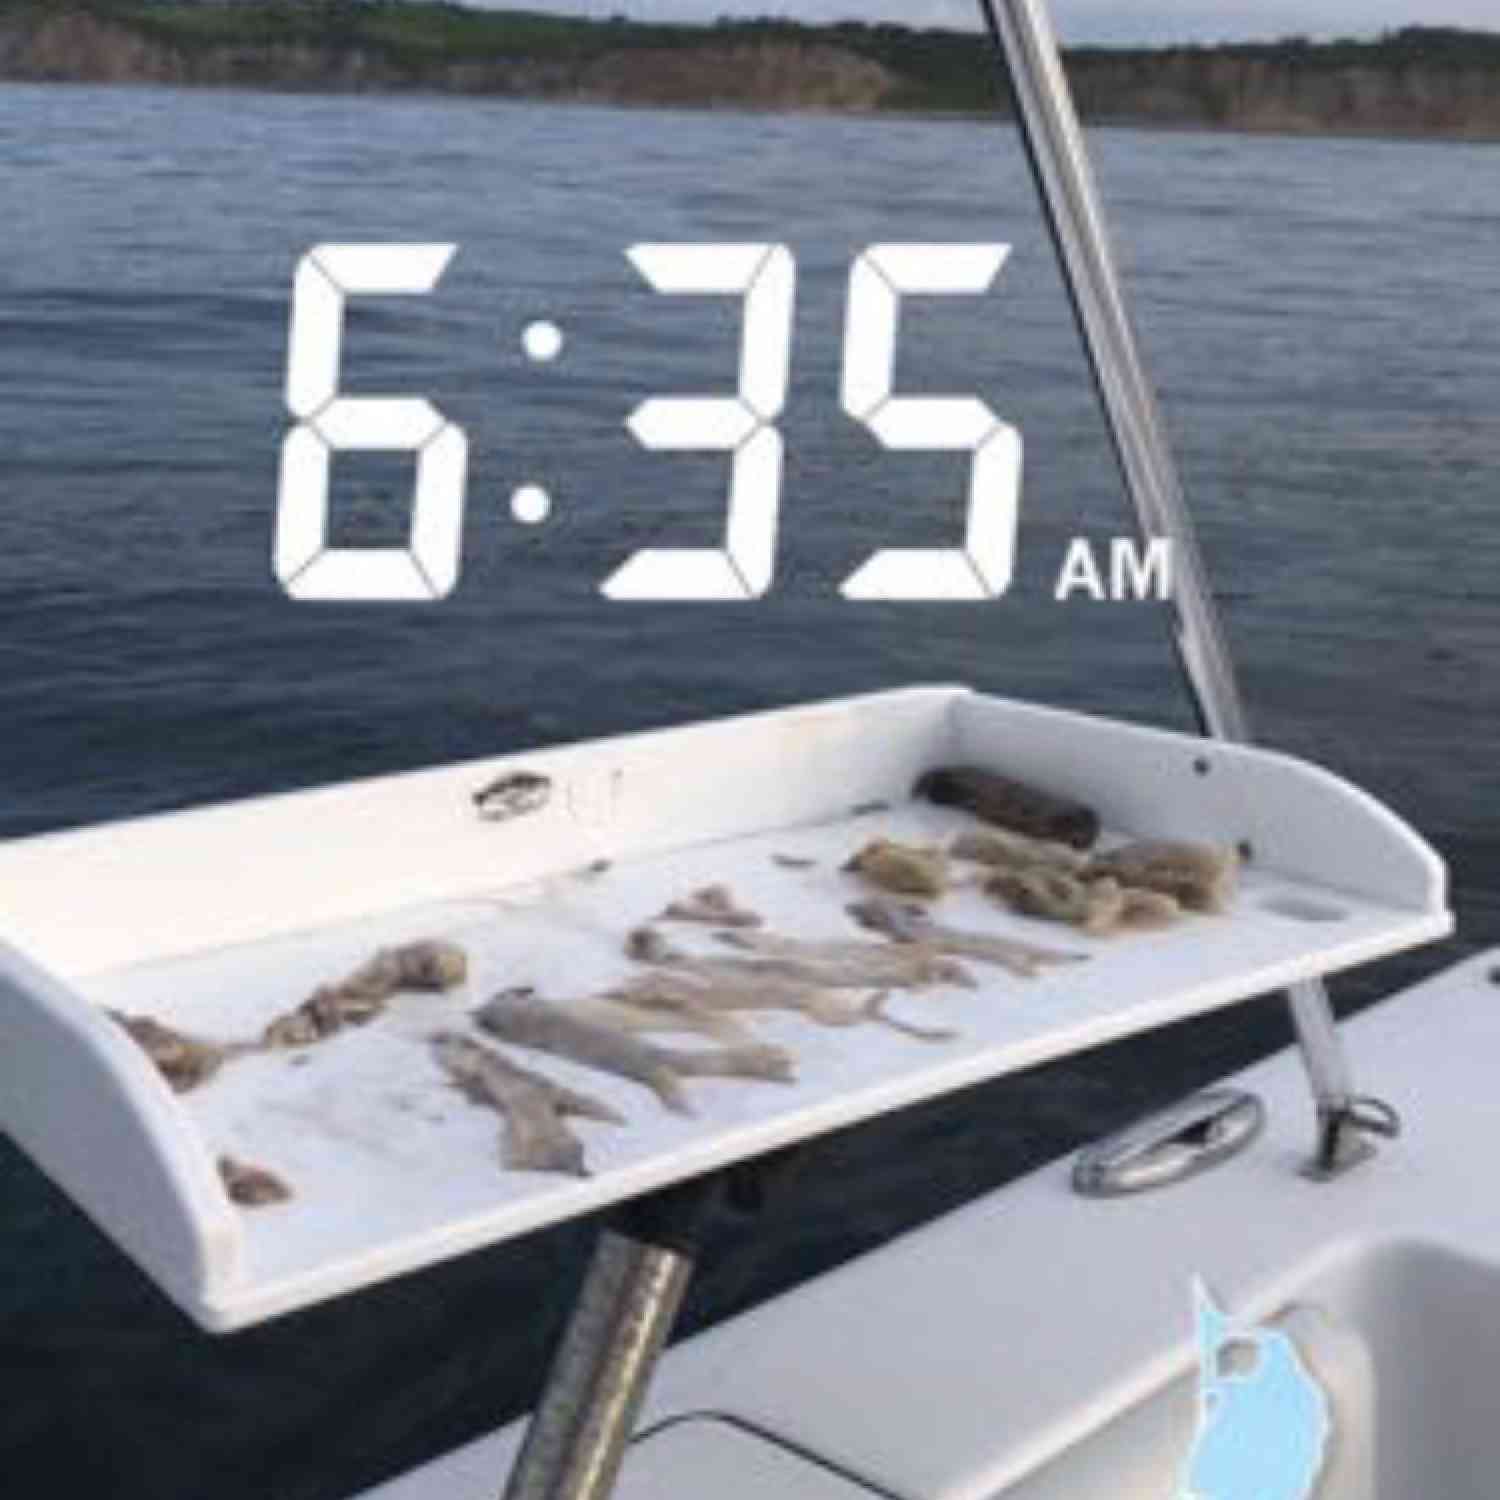 Title: Early Bird gets the Worm! - On board their Sportsman Open 212 Center Console - Location: Block Island, RI. Participating in the Photo Contest #SportsmanMay2020